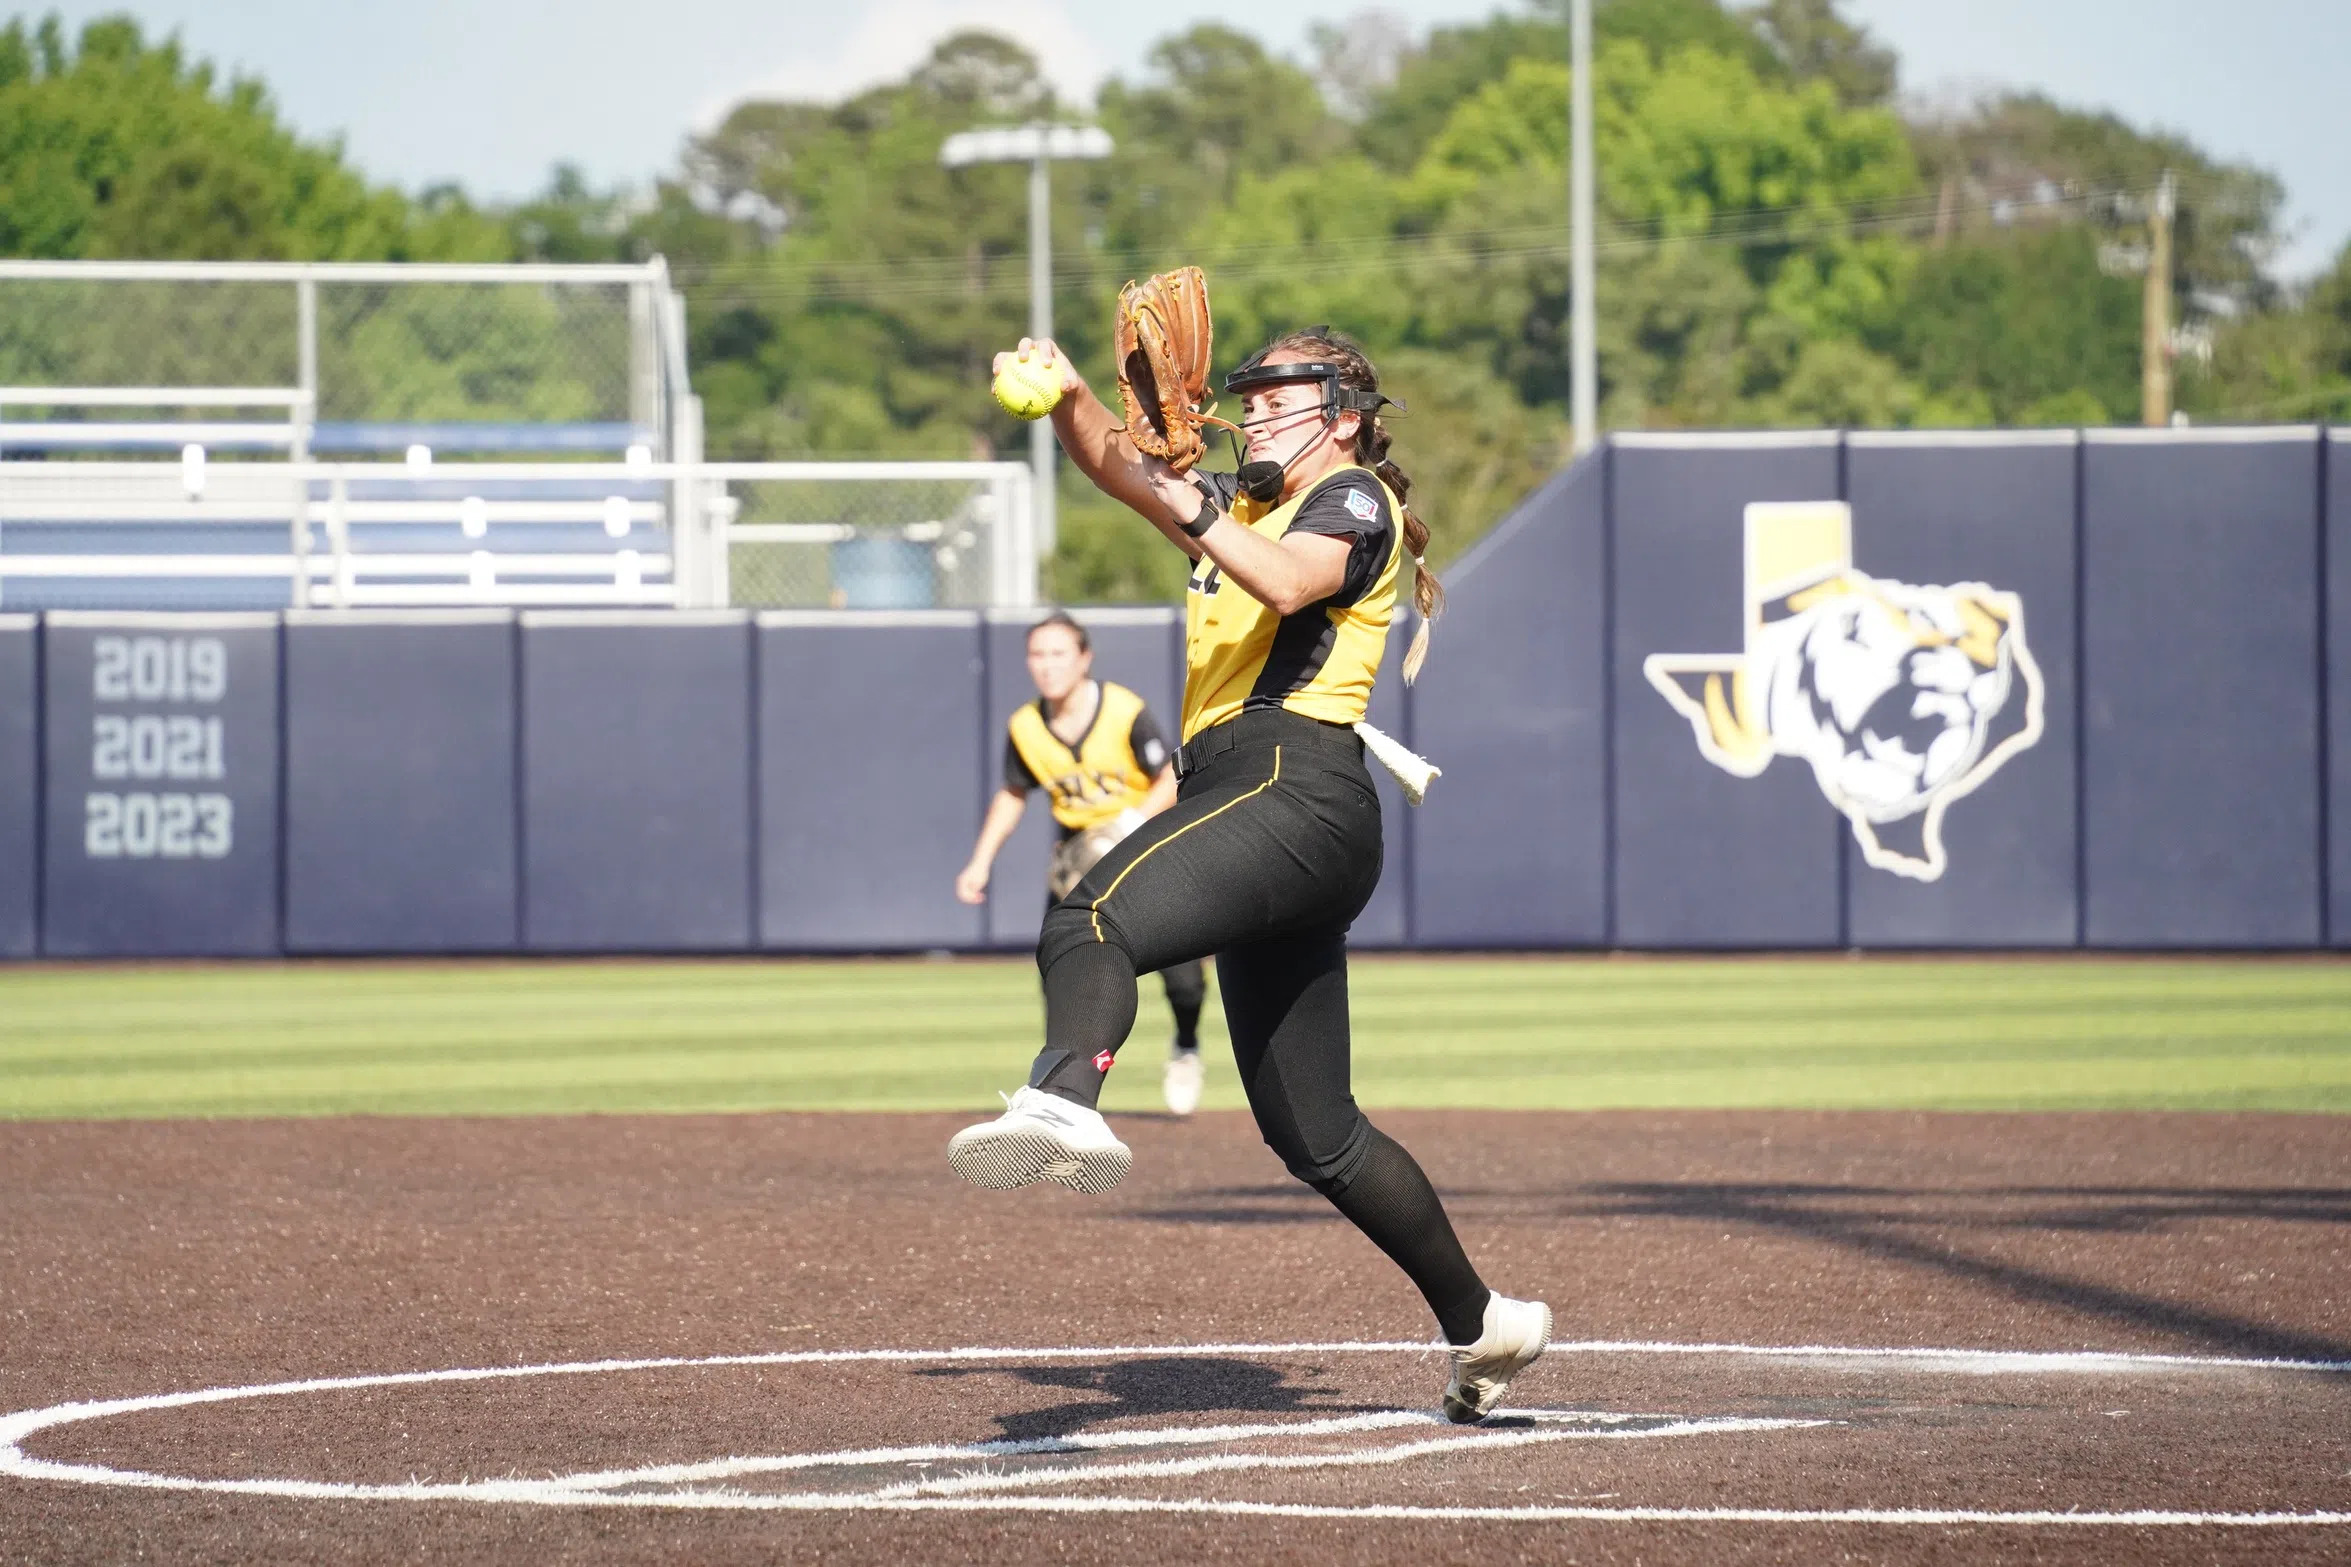 TLU SOFTBALL -- Ashlyn Strother Earns CSC Academic All-America Honors for Third Time